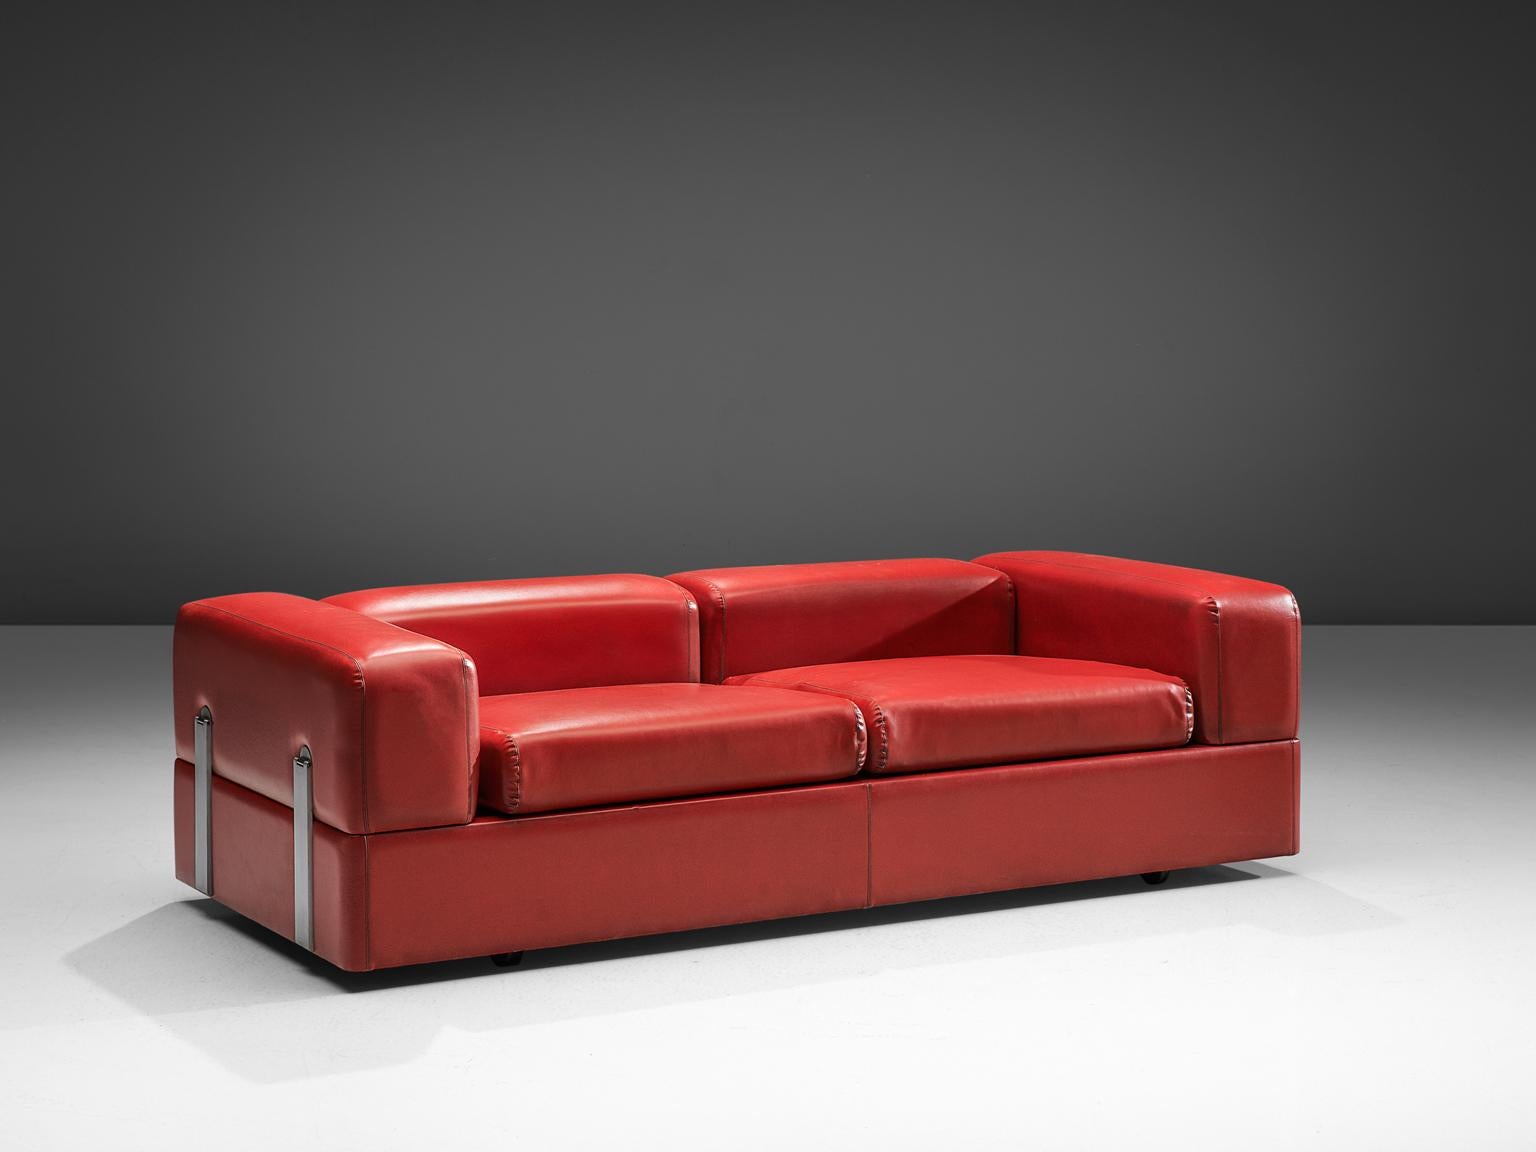 Tito Agnoli for Cinova, sofa bed 711 in red faux leather, Italy, 1960s.

This postmodern daybed and or sofa is designed by Tito Agnoli and manufactured by Cinova. The sofa has a wooden interior and features a metal spring seat. A mattress covered